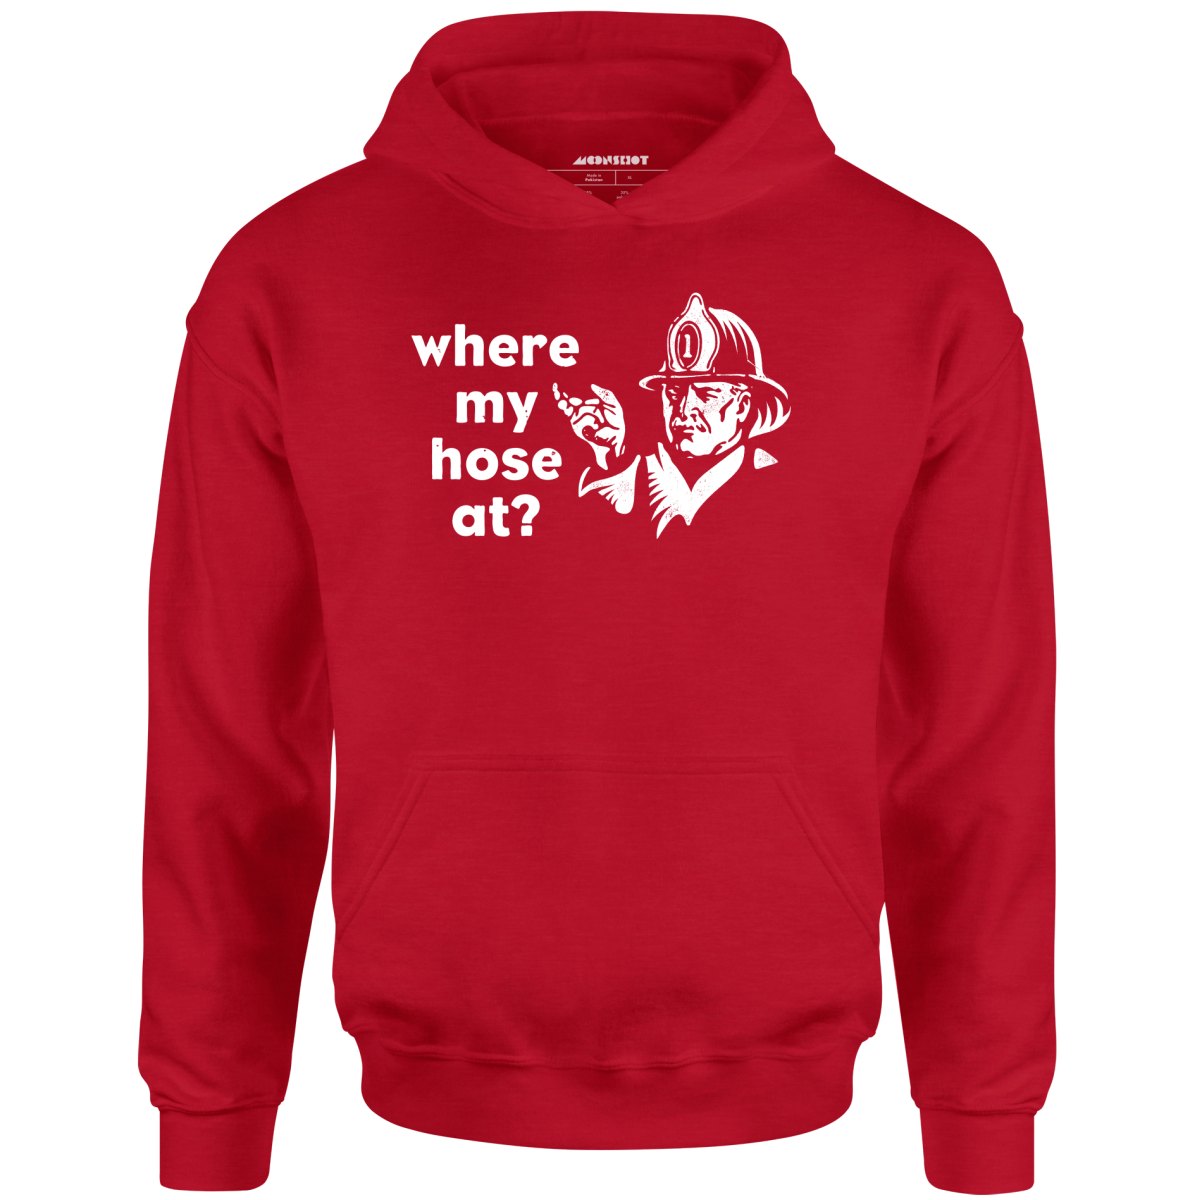 Where My Hose At? - Unisex Hoodie